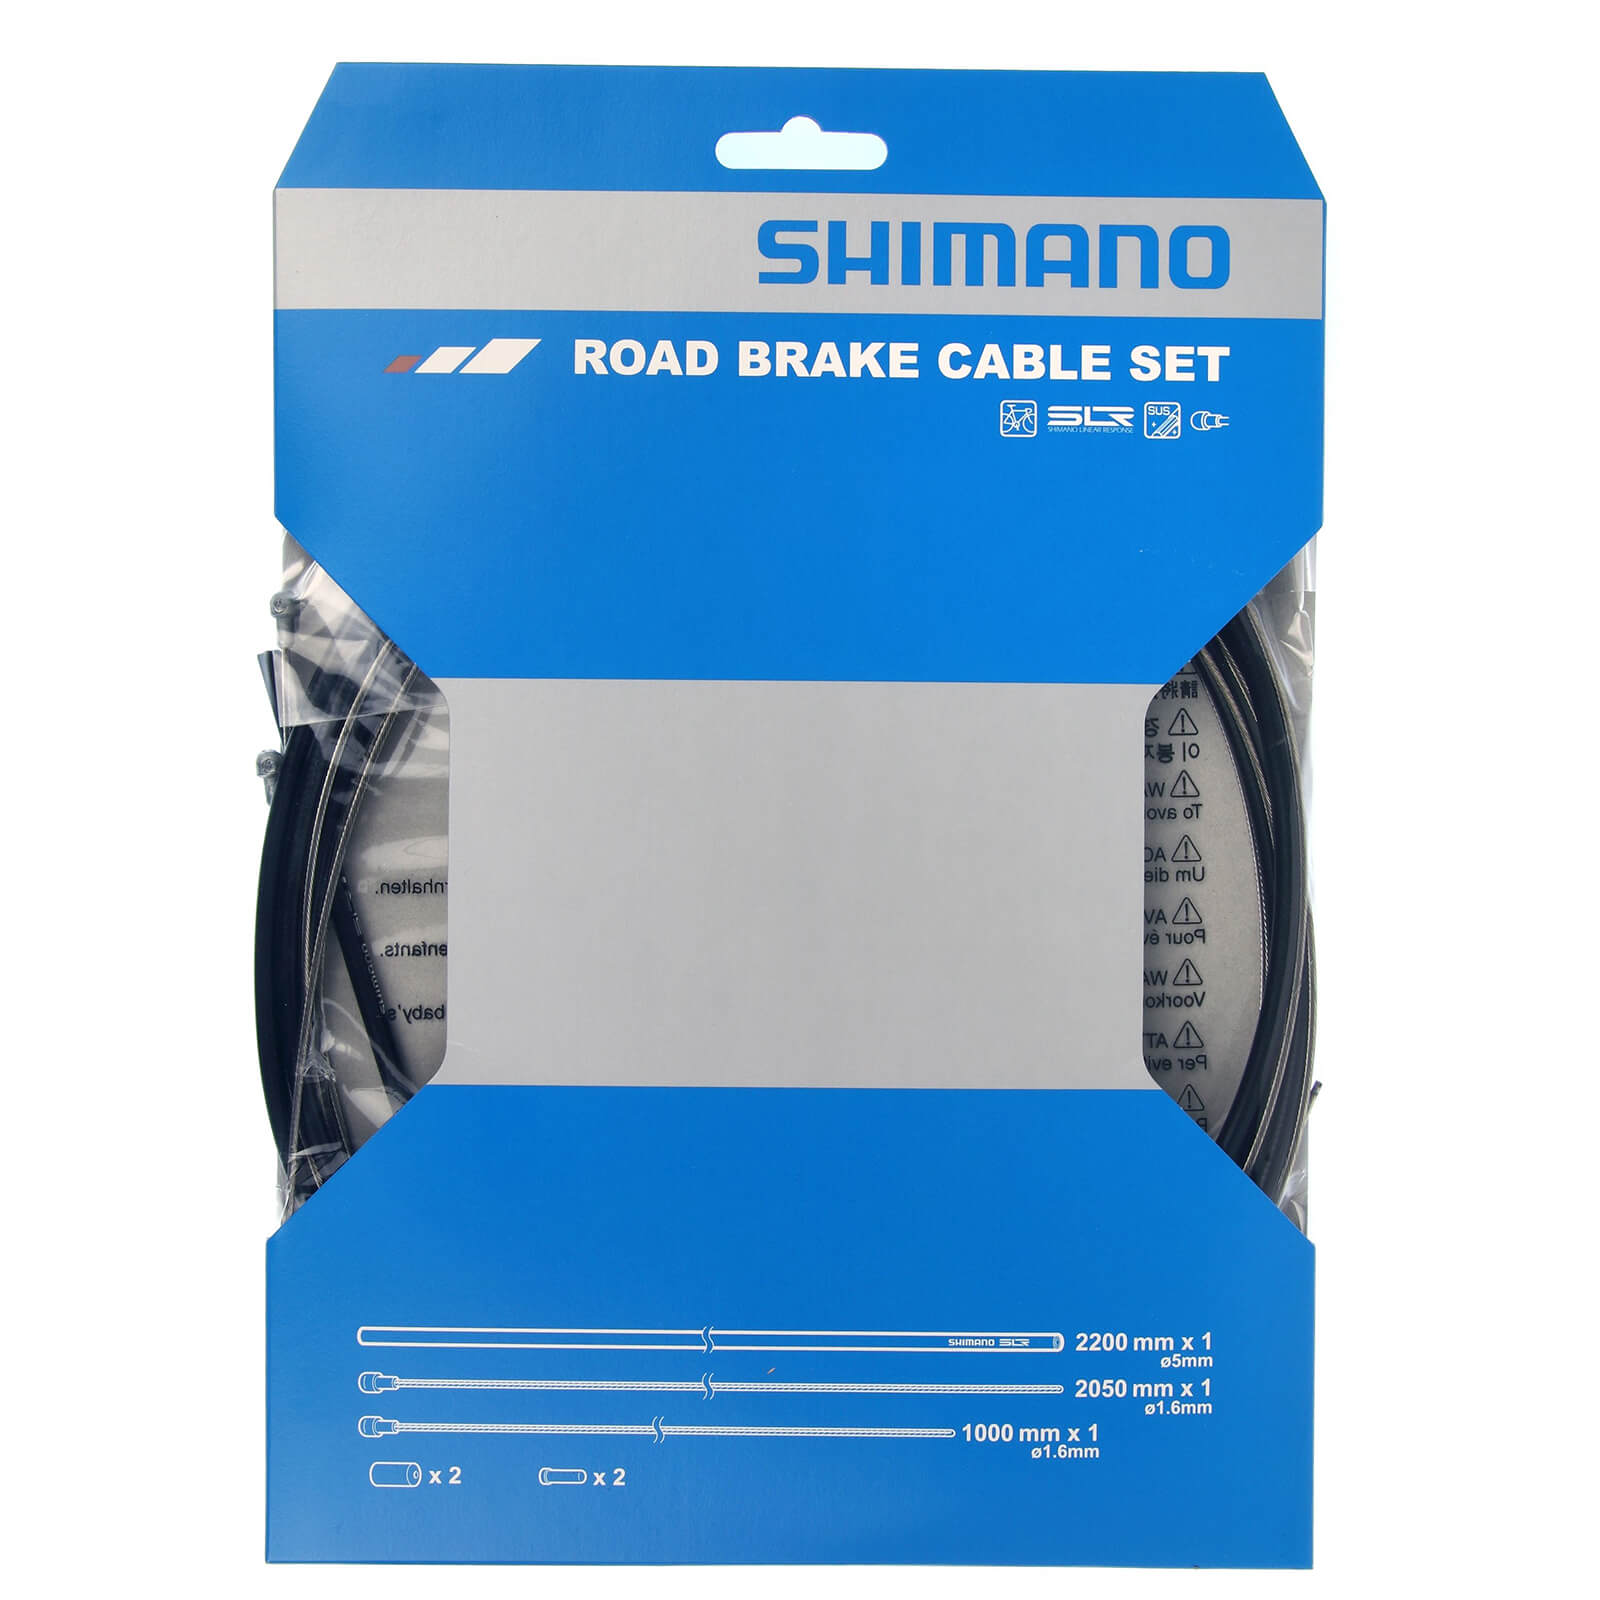 Shimano Road Brake Cable Set With Stainless Steel Inner – Black